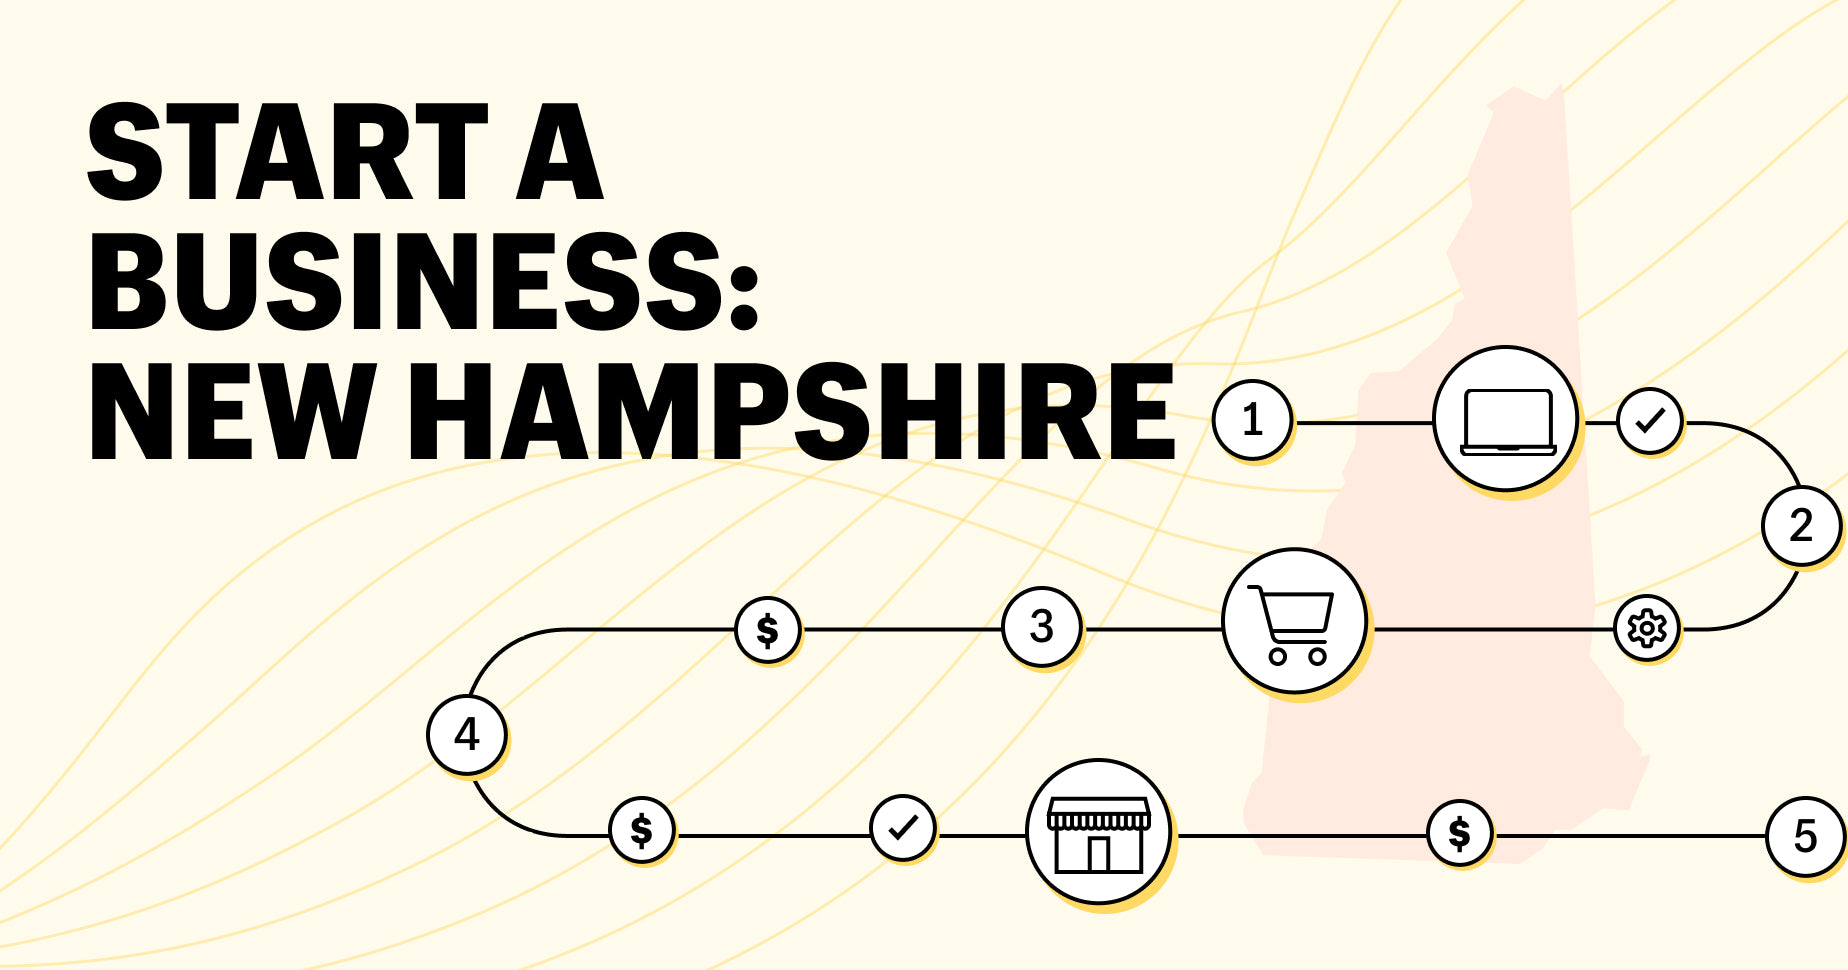 start a business new hampshire, outline of state, storefront, laptop screen, shopping cart, and cash $ icons